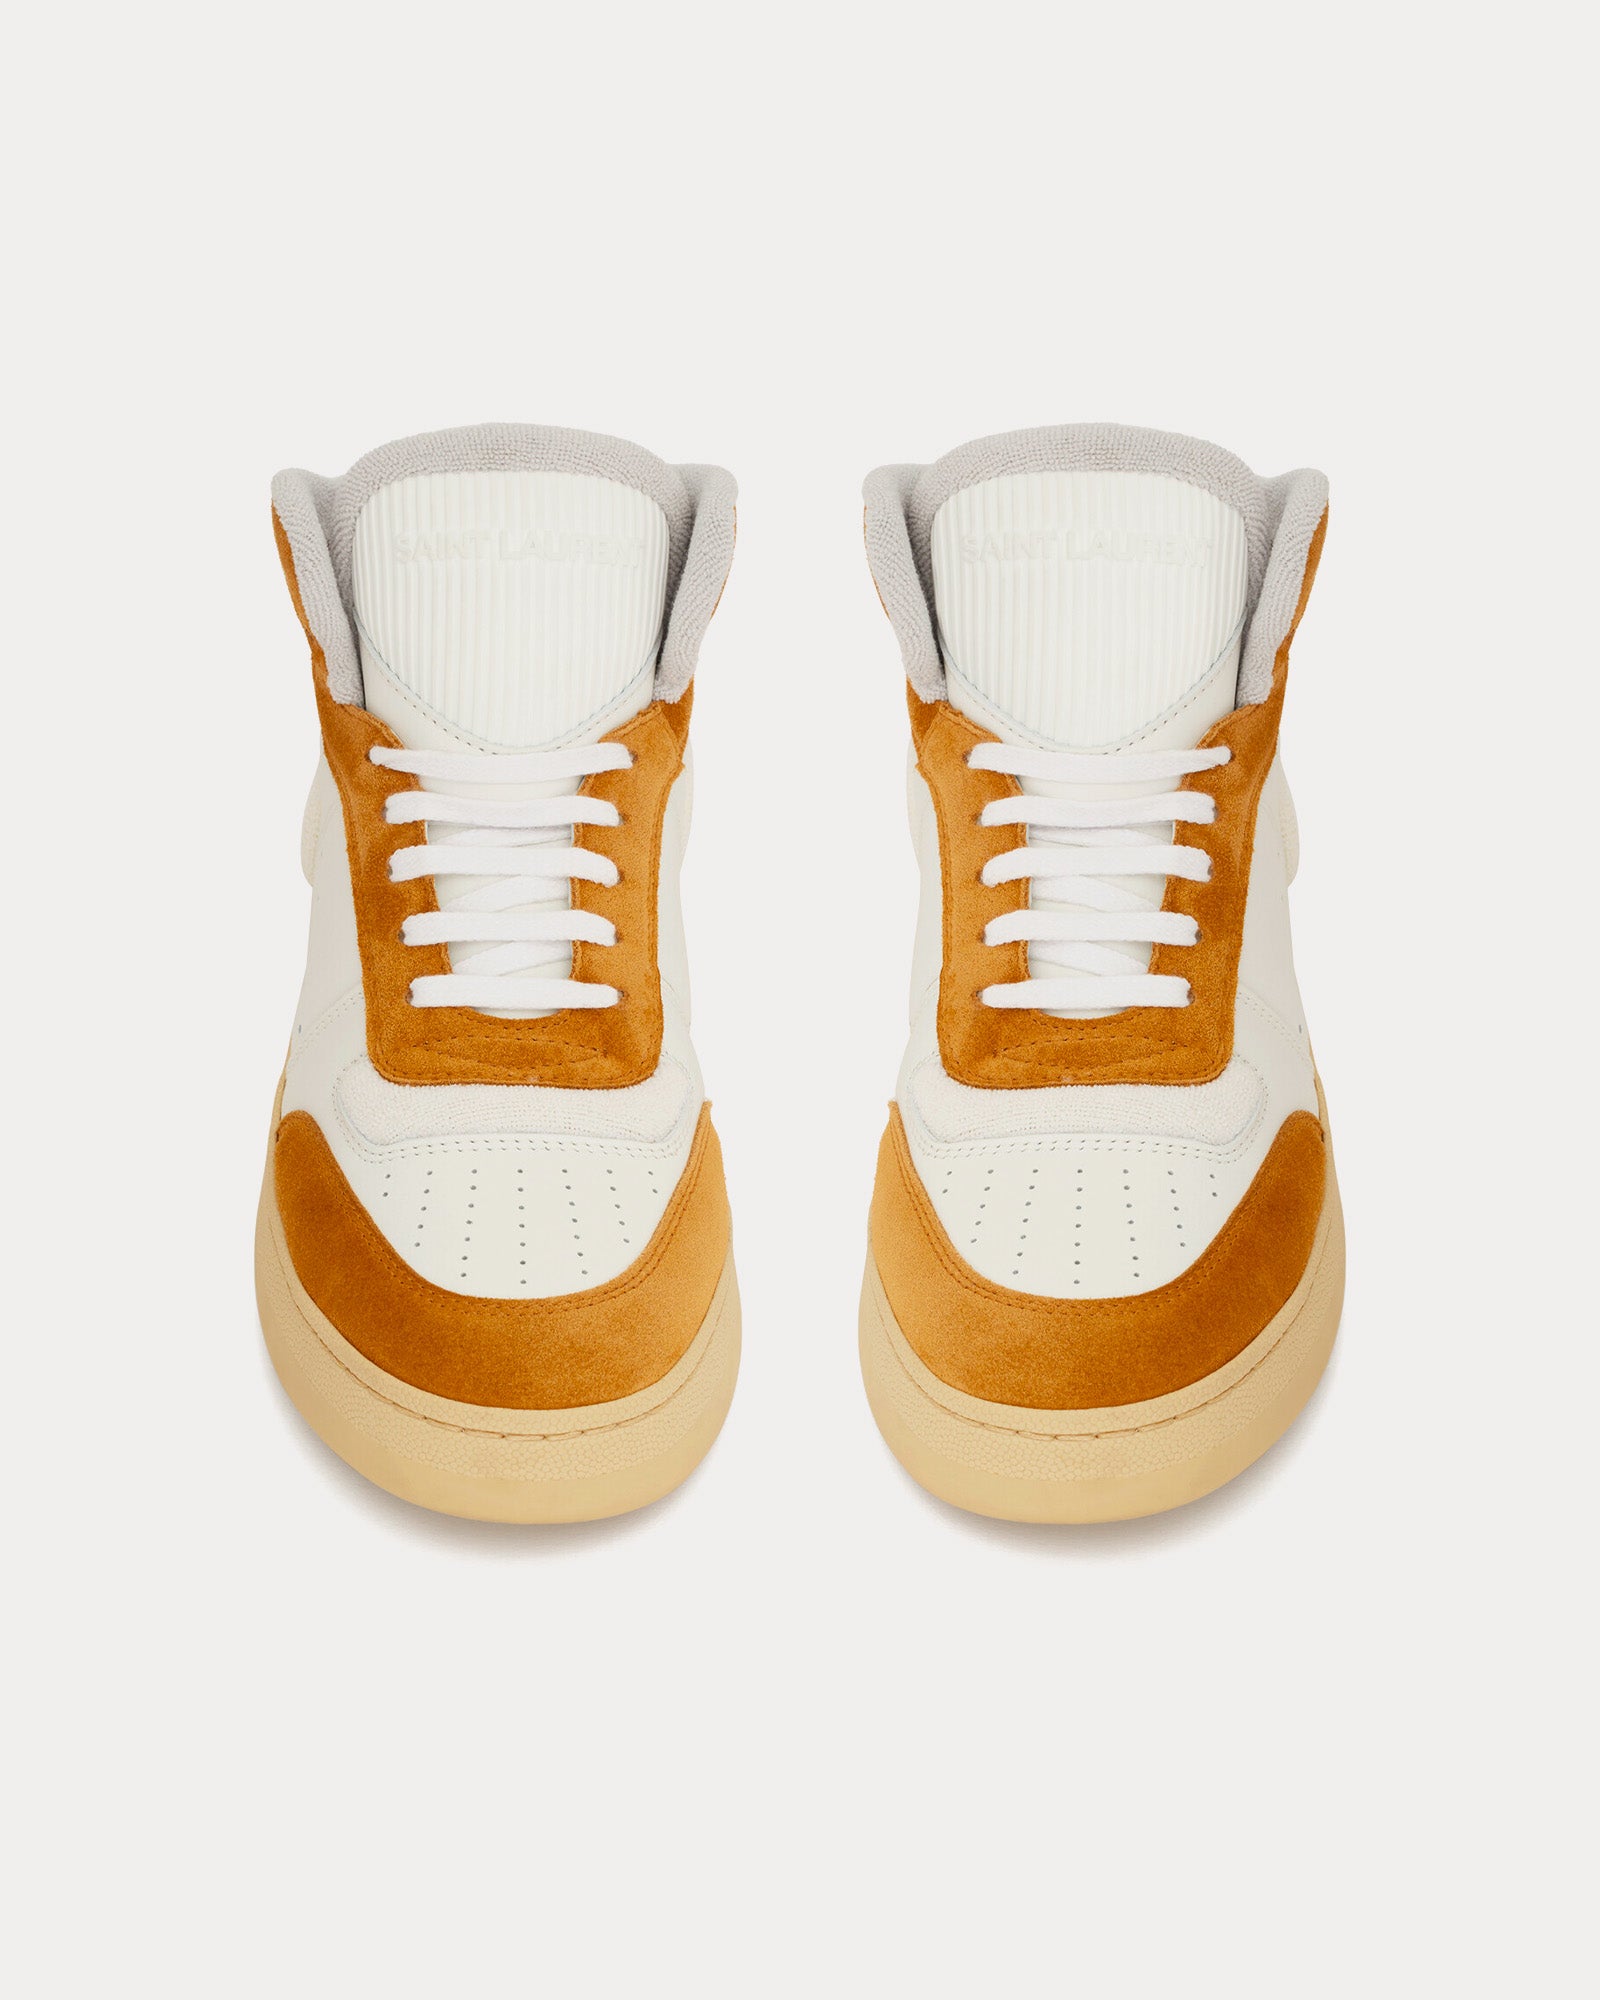 Saint Laurent - SL/80 Leather & Suede White / Mustard Mid Top Sneakers